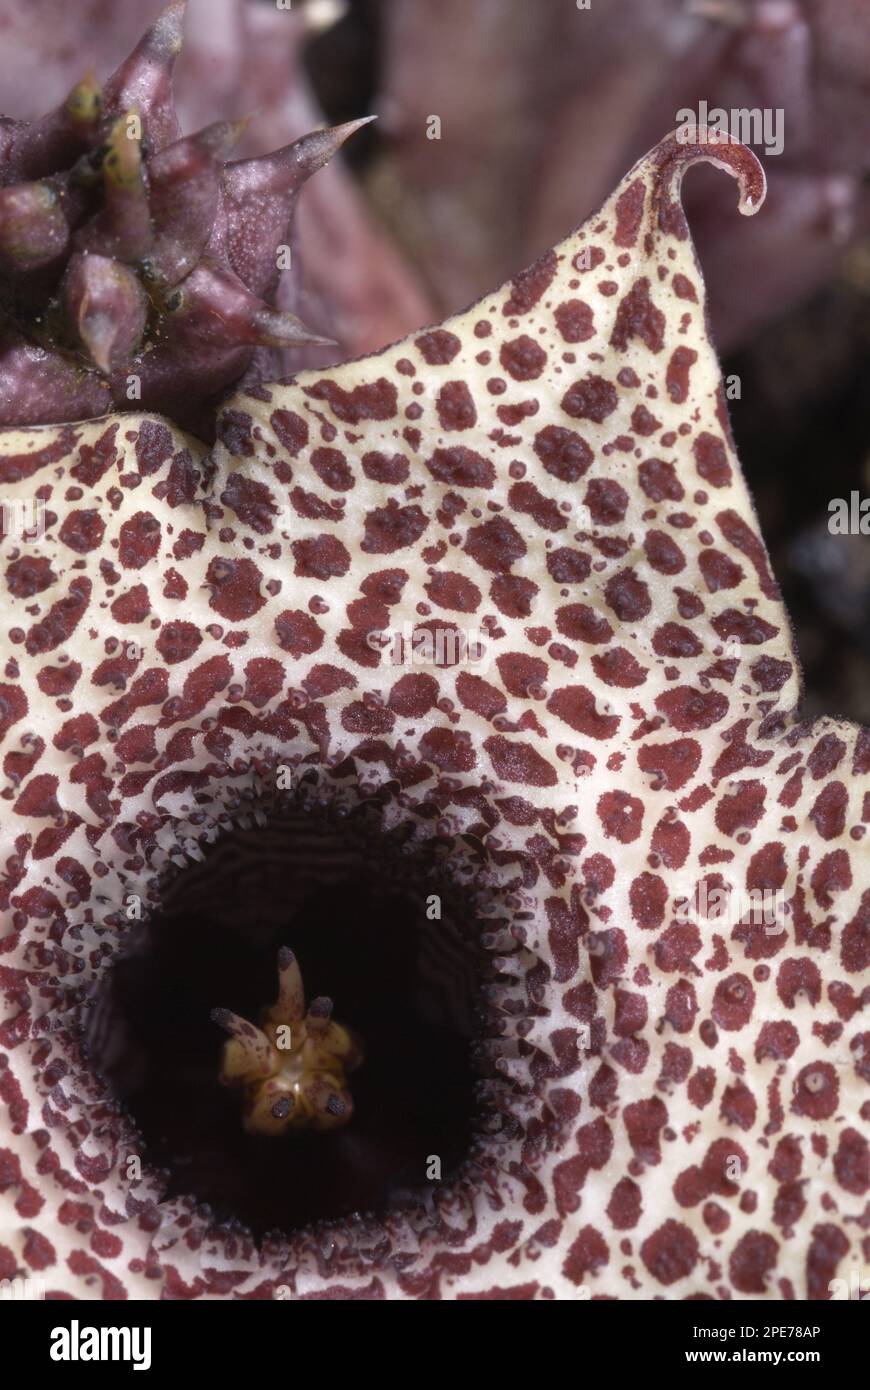 Carrion flower (Huernia hislopii) Close-up of flower, smells like rotten meat to attract flies as pollinators, Zimbabwe Stock Photo